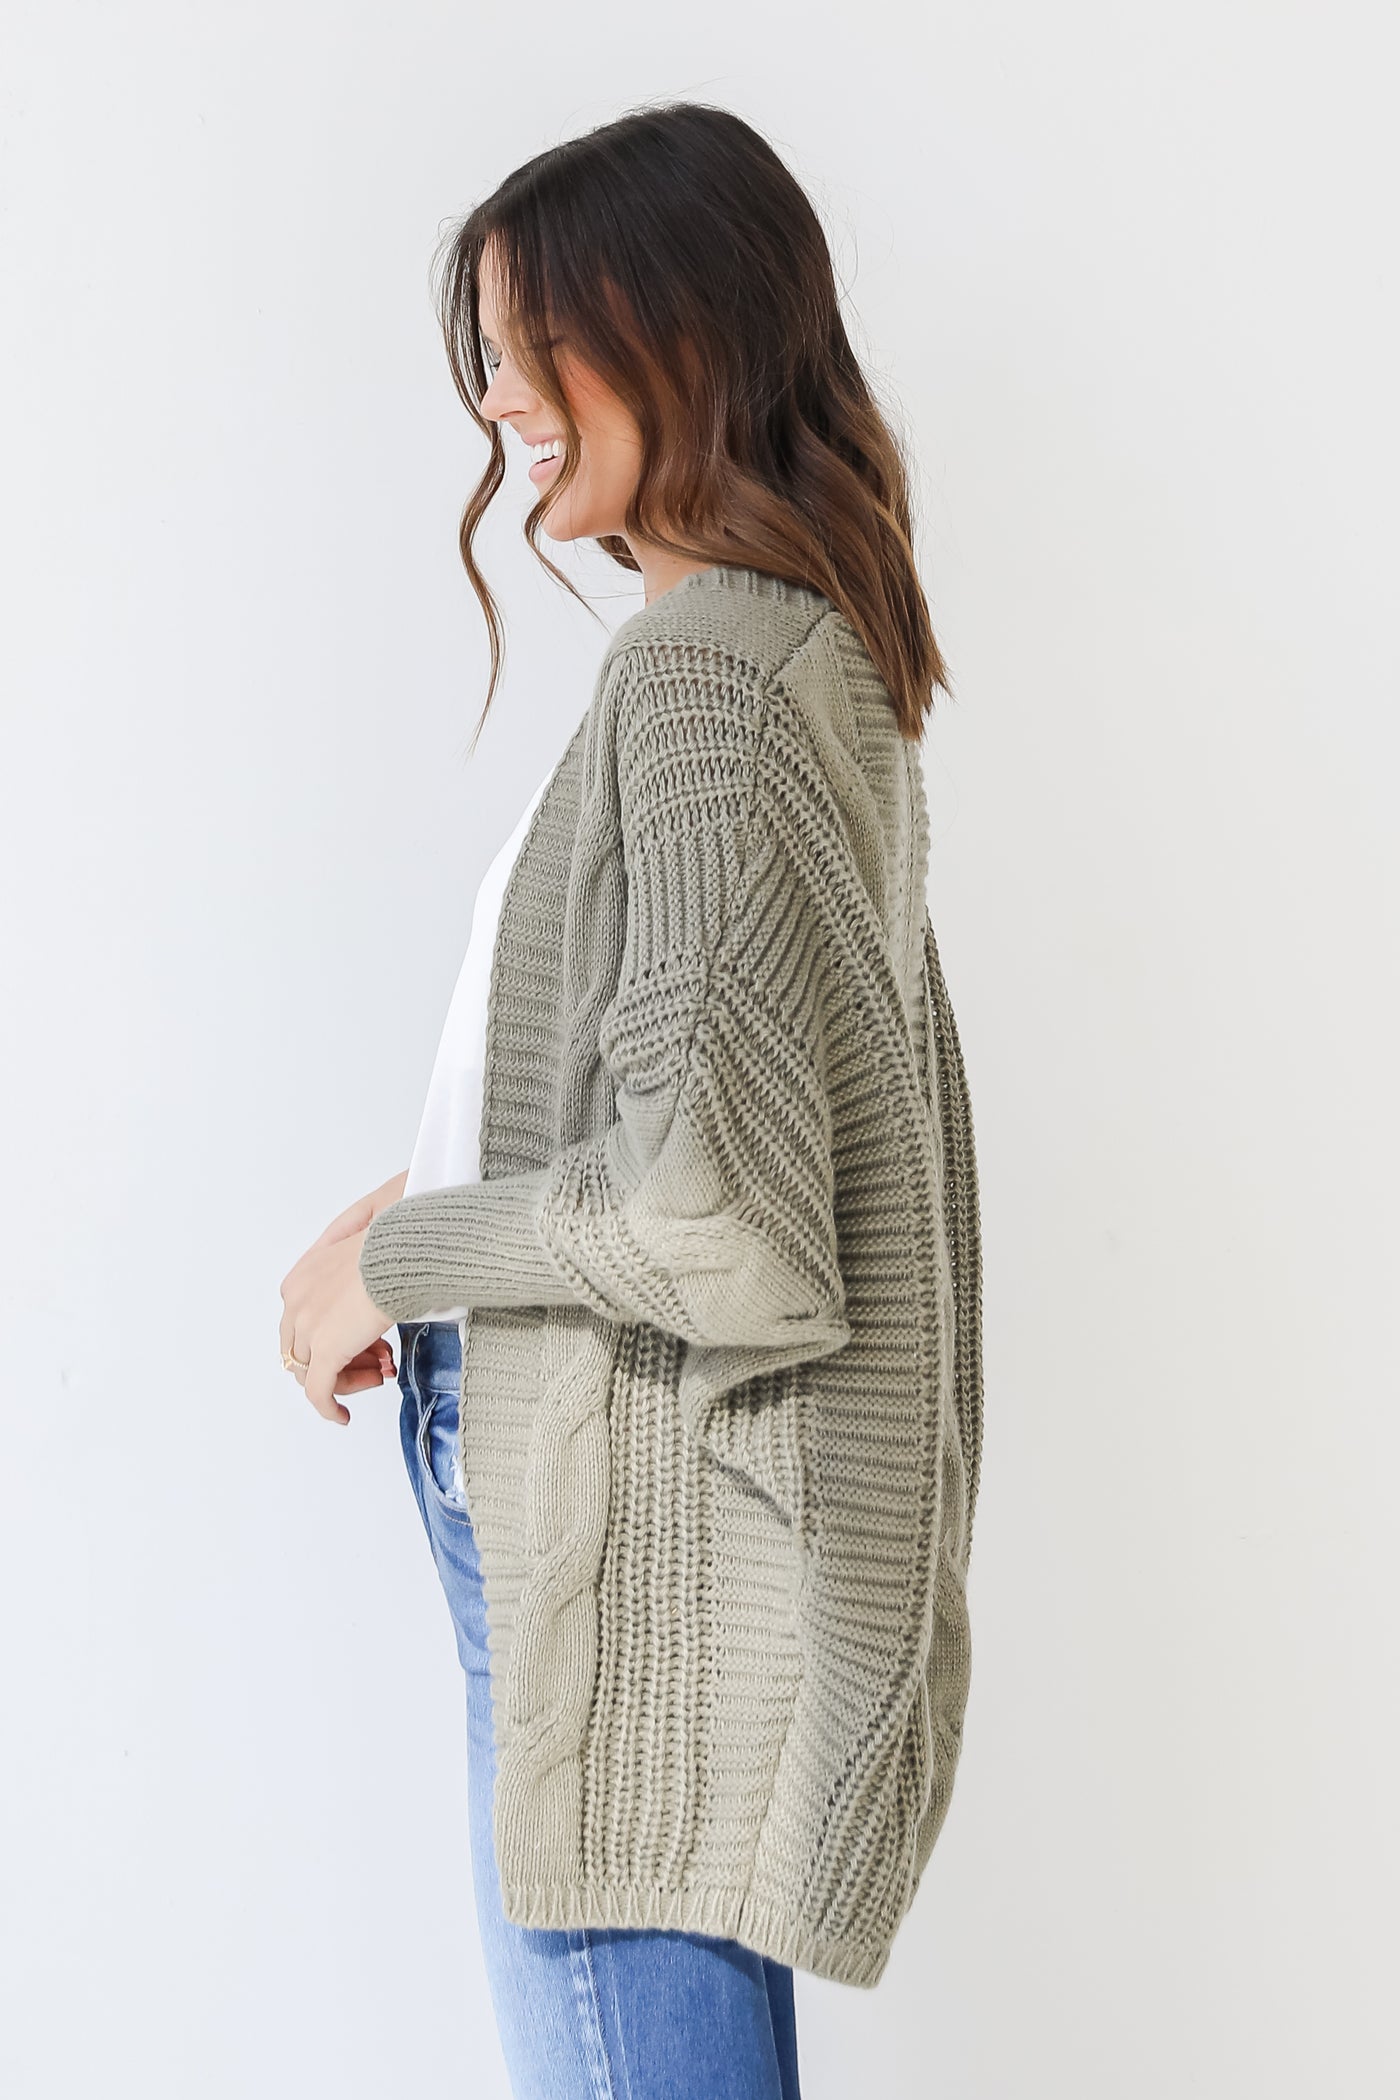 Sweater Cardigan in olive side view